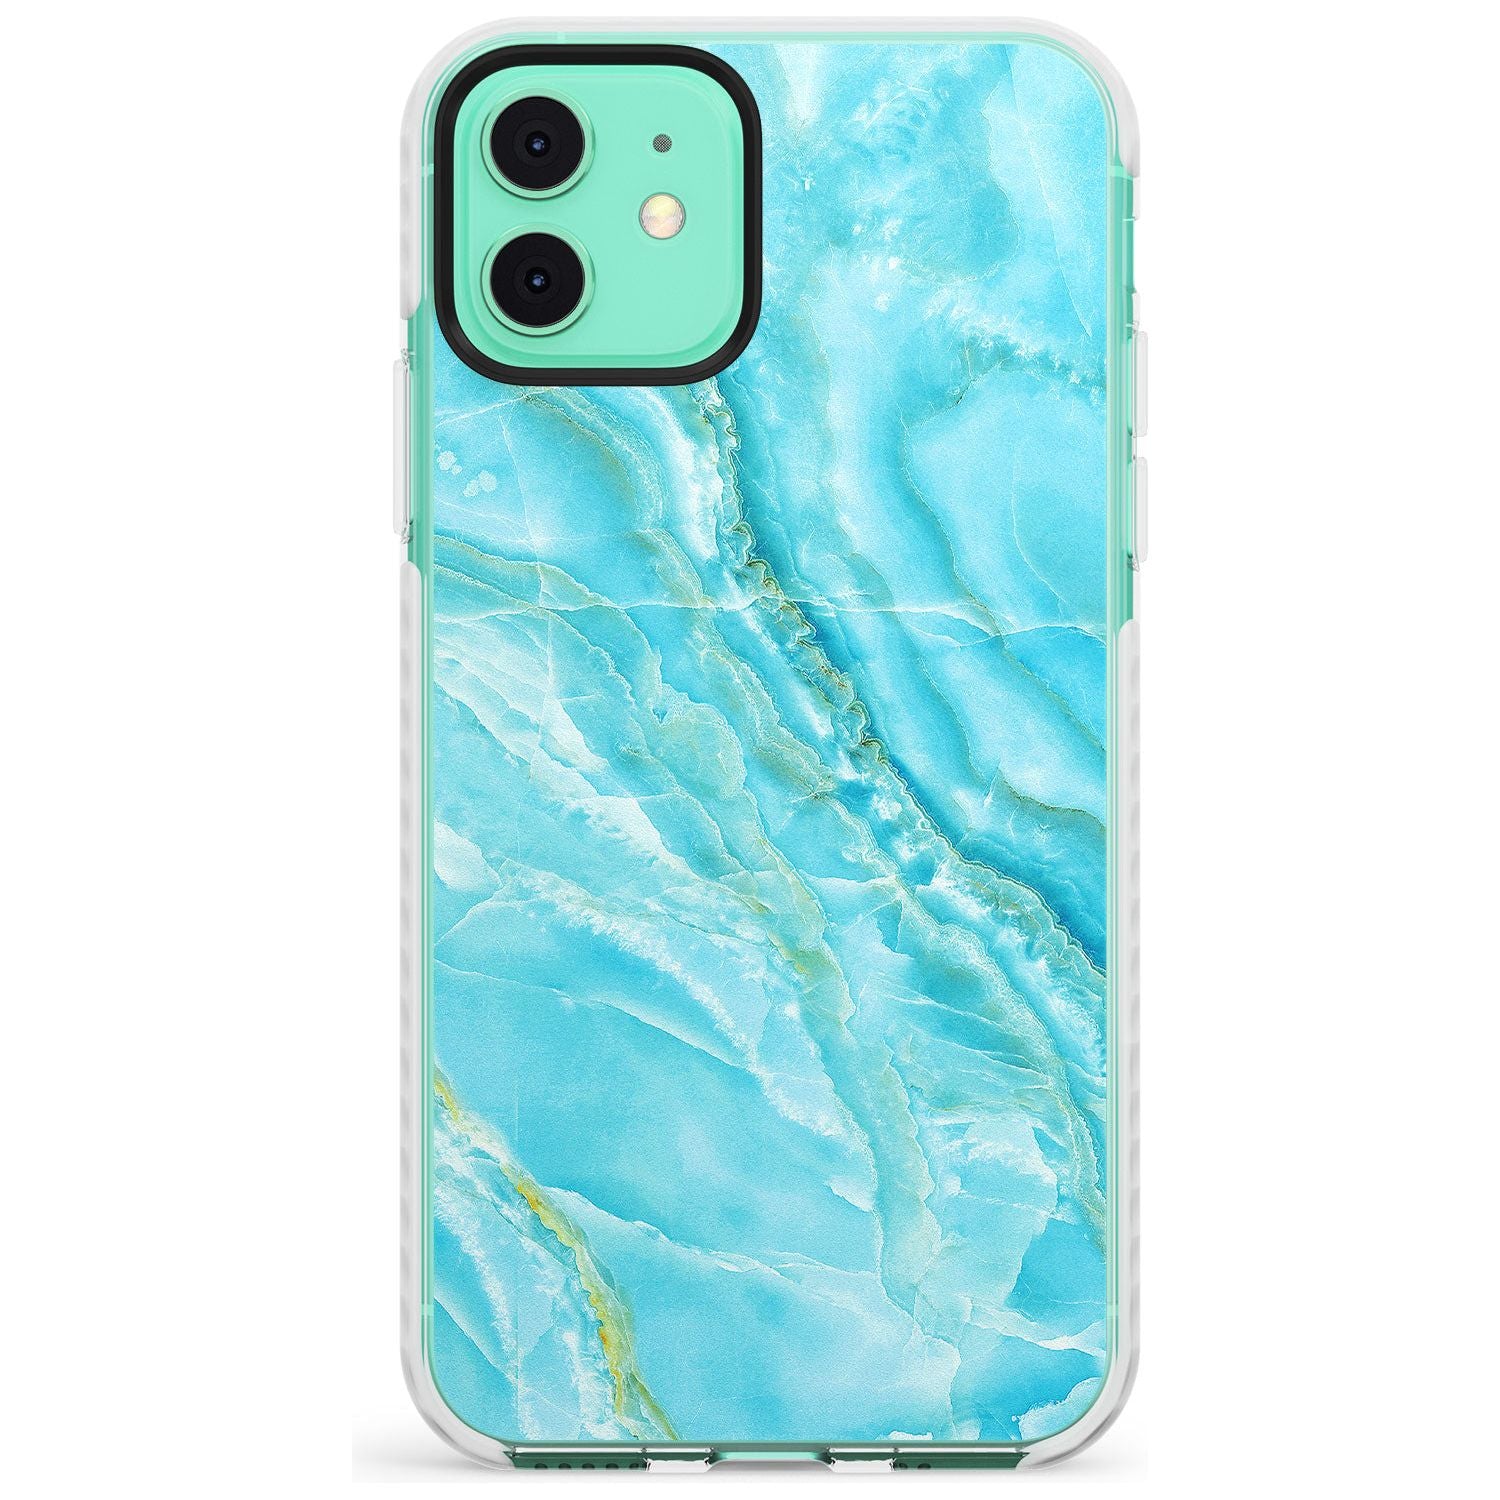 Bright Blue Onyx Marble Texture Slim TPU Phone Case for iPhone 11